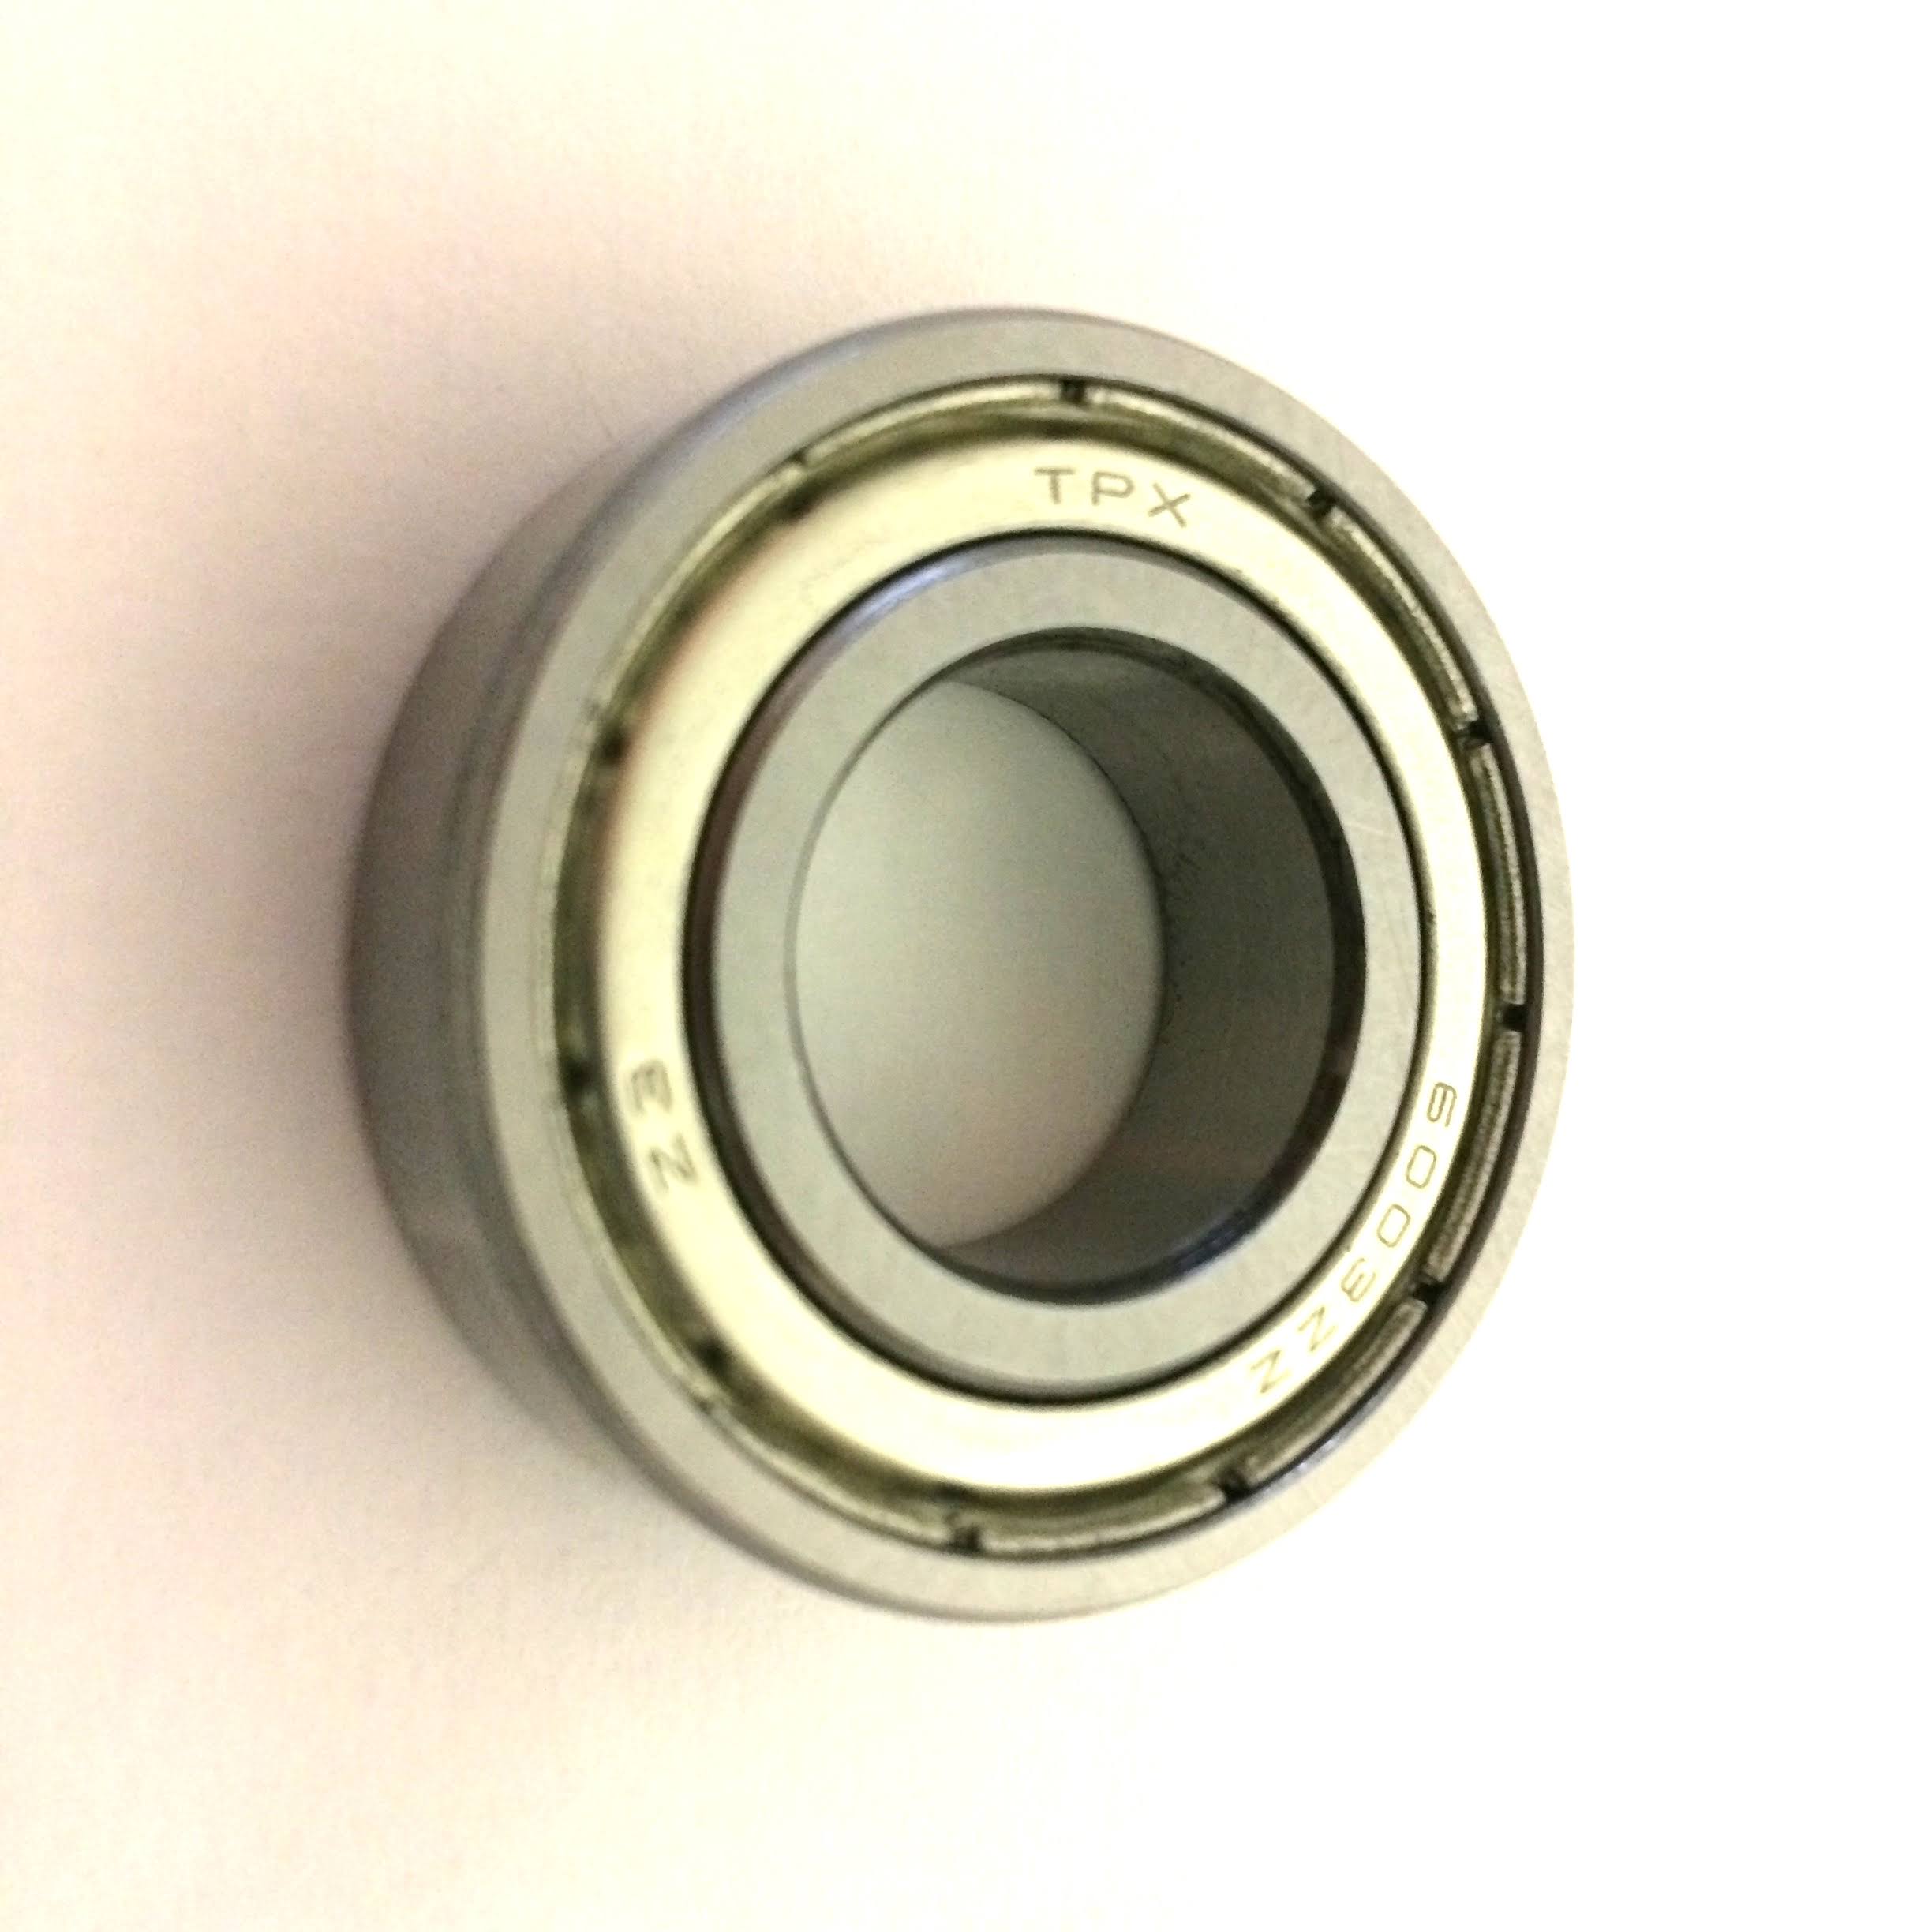 Sun Bicycles 19125 Trike Replacement Bearing For 17 mm Axle - Baja 17